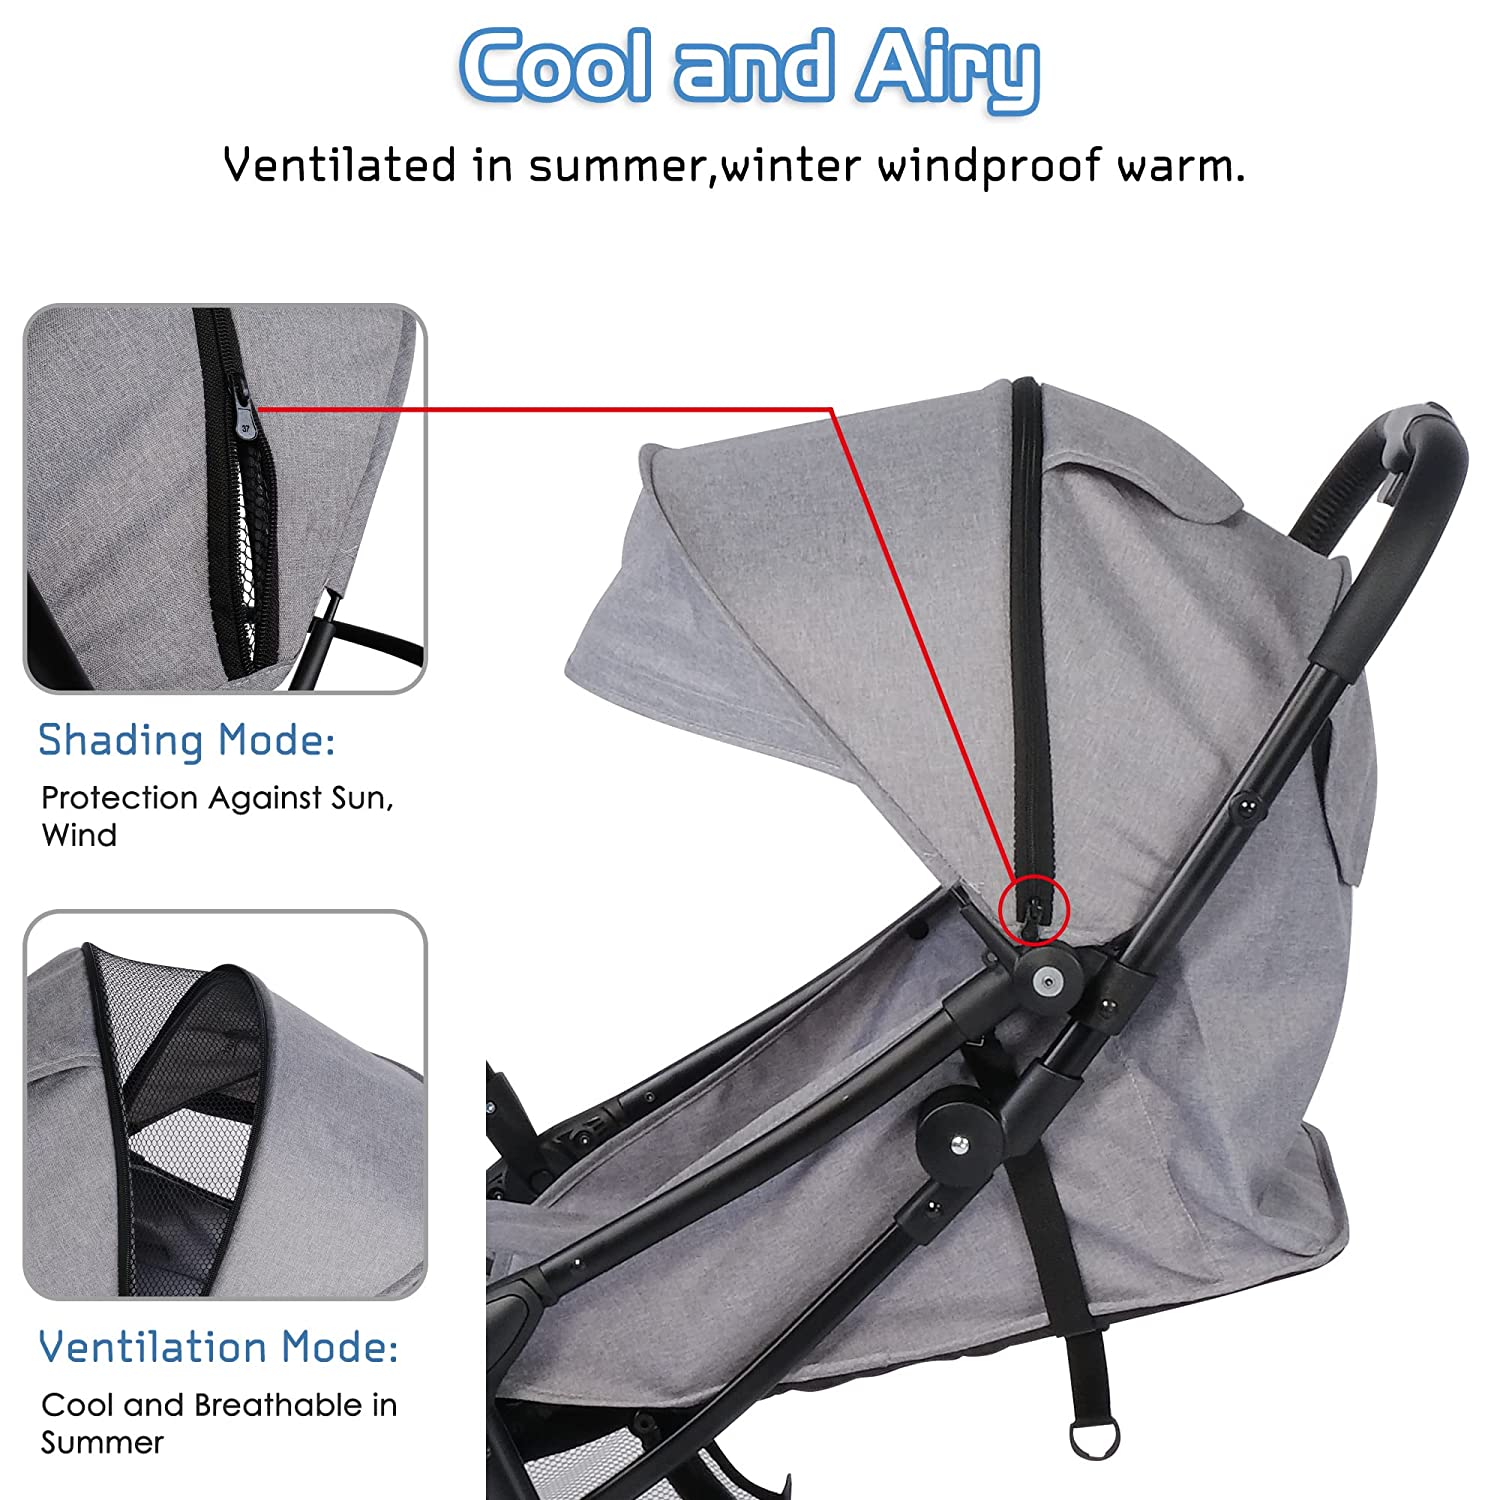 (Out of Stock) Compact Travel Baby Stroller for Airplane, One-Hand  Fold Lightweight Stroller w/ Adjustable Backrest and Canopy